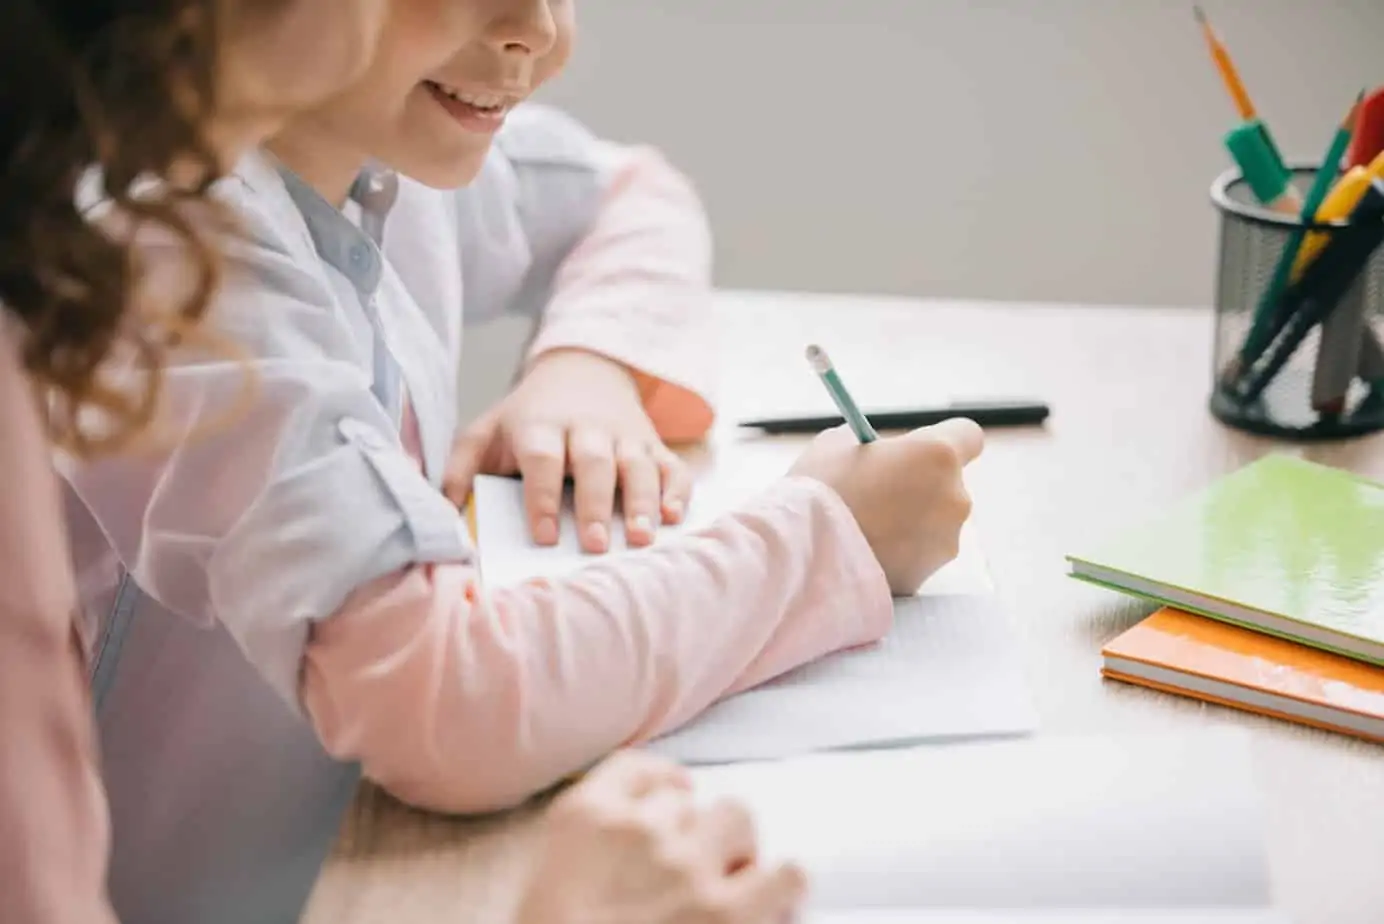 Are you considering homeschooling your kids this year or possibly in the future? This is a balanced list of pros and cons of homeschooling to help you make an informed and confident school choice decision. 